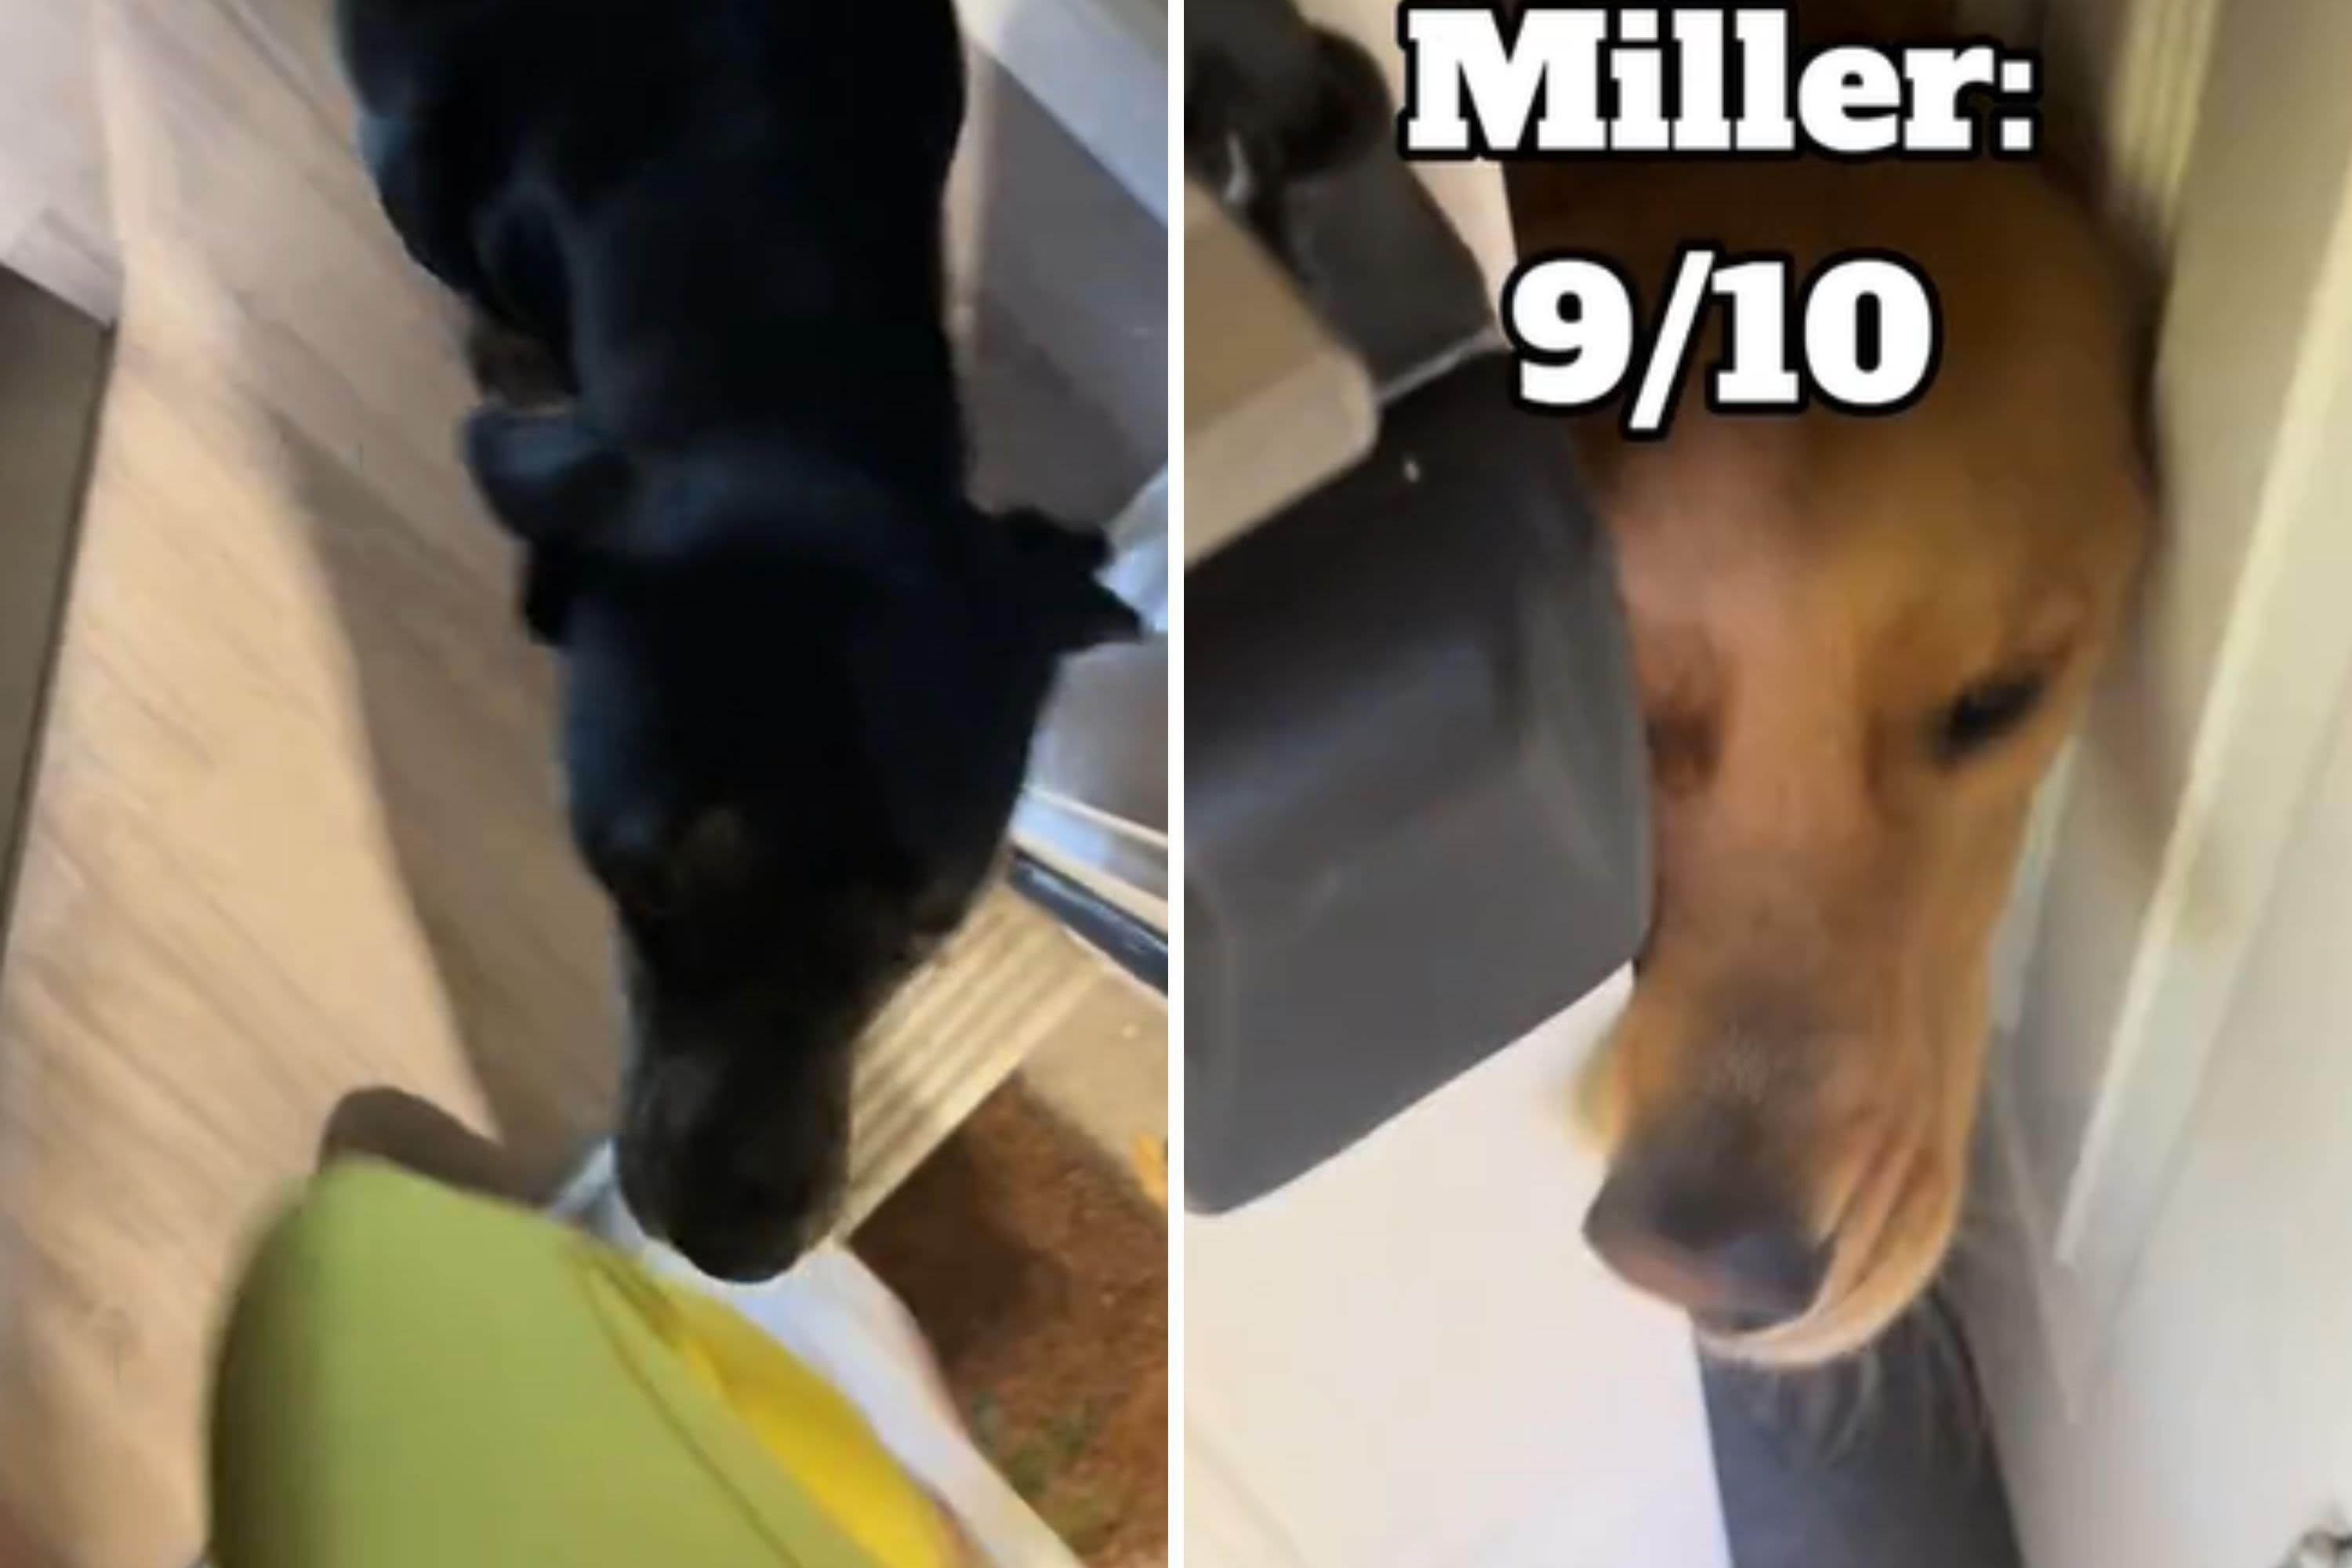 Dog walker rating how pups greet her melts hearts: "Should be a series"